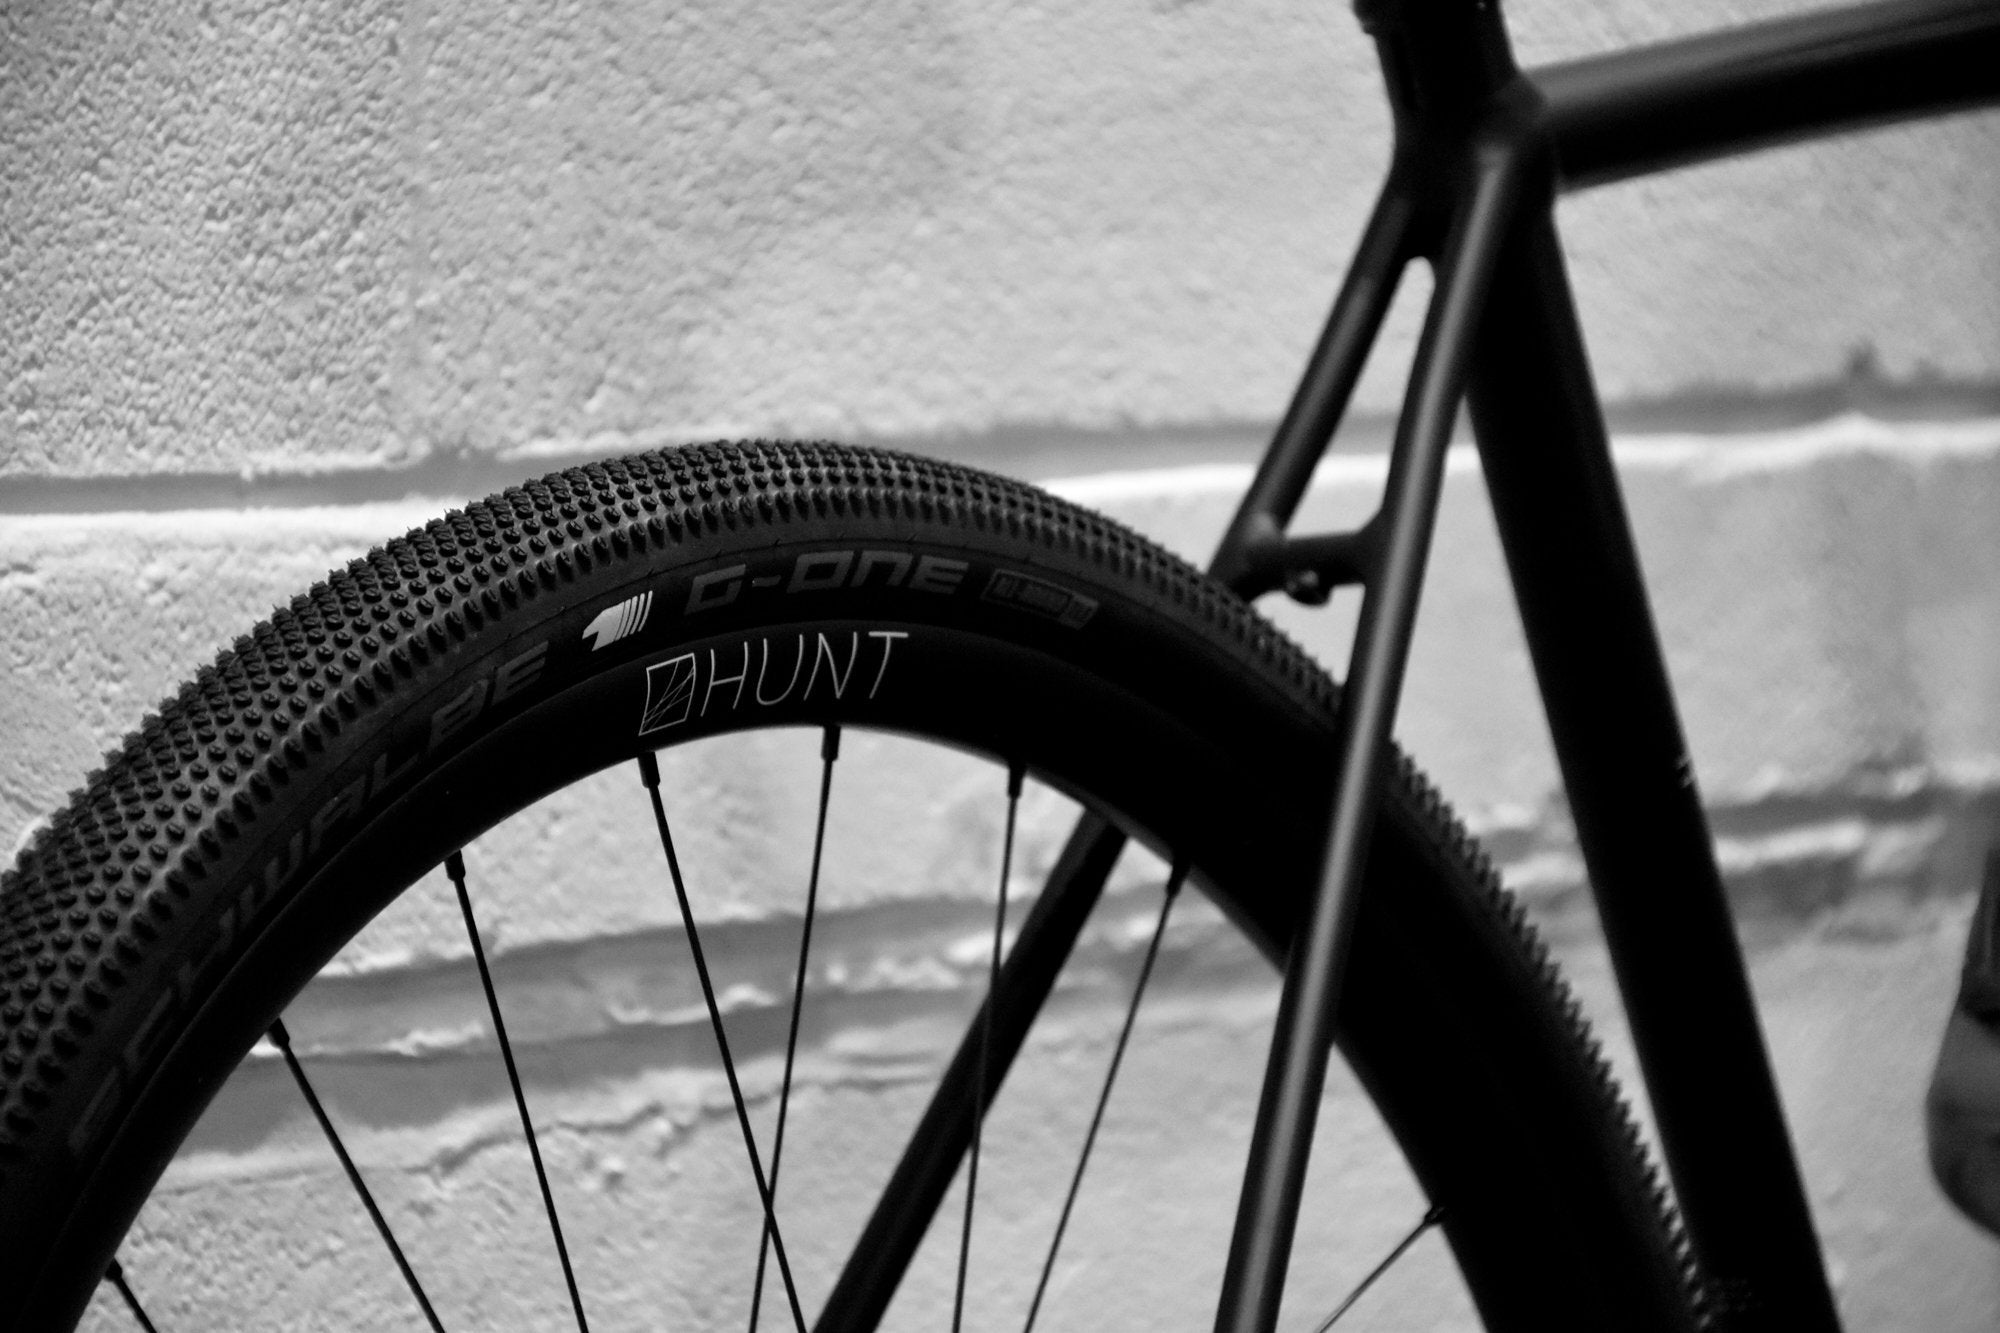 <h1>Weight</h1><i>The consequence of the fanatic attention to detail is a low 1425g wheelset weight, and dependable reliability for many adventures to come. Acceleration and climbing are massively improved over many of the stock wheels supplied on road/gravel/CX disc brake bikes.</i>